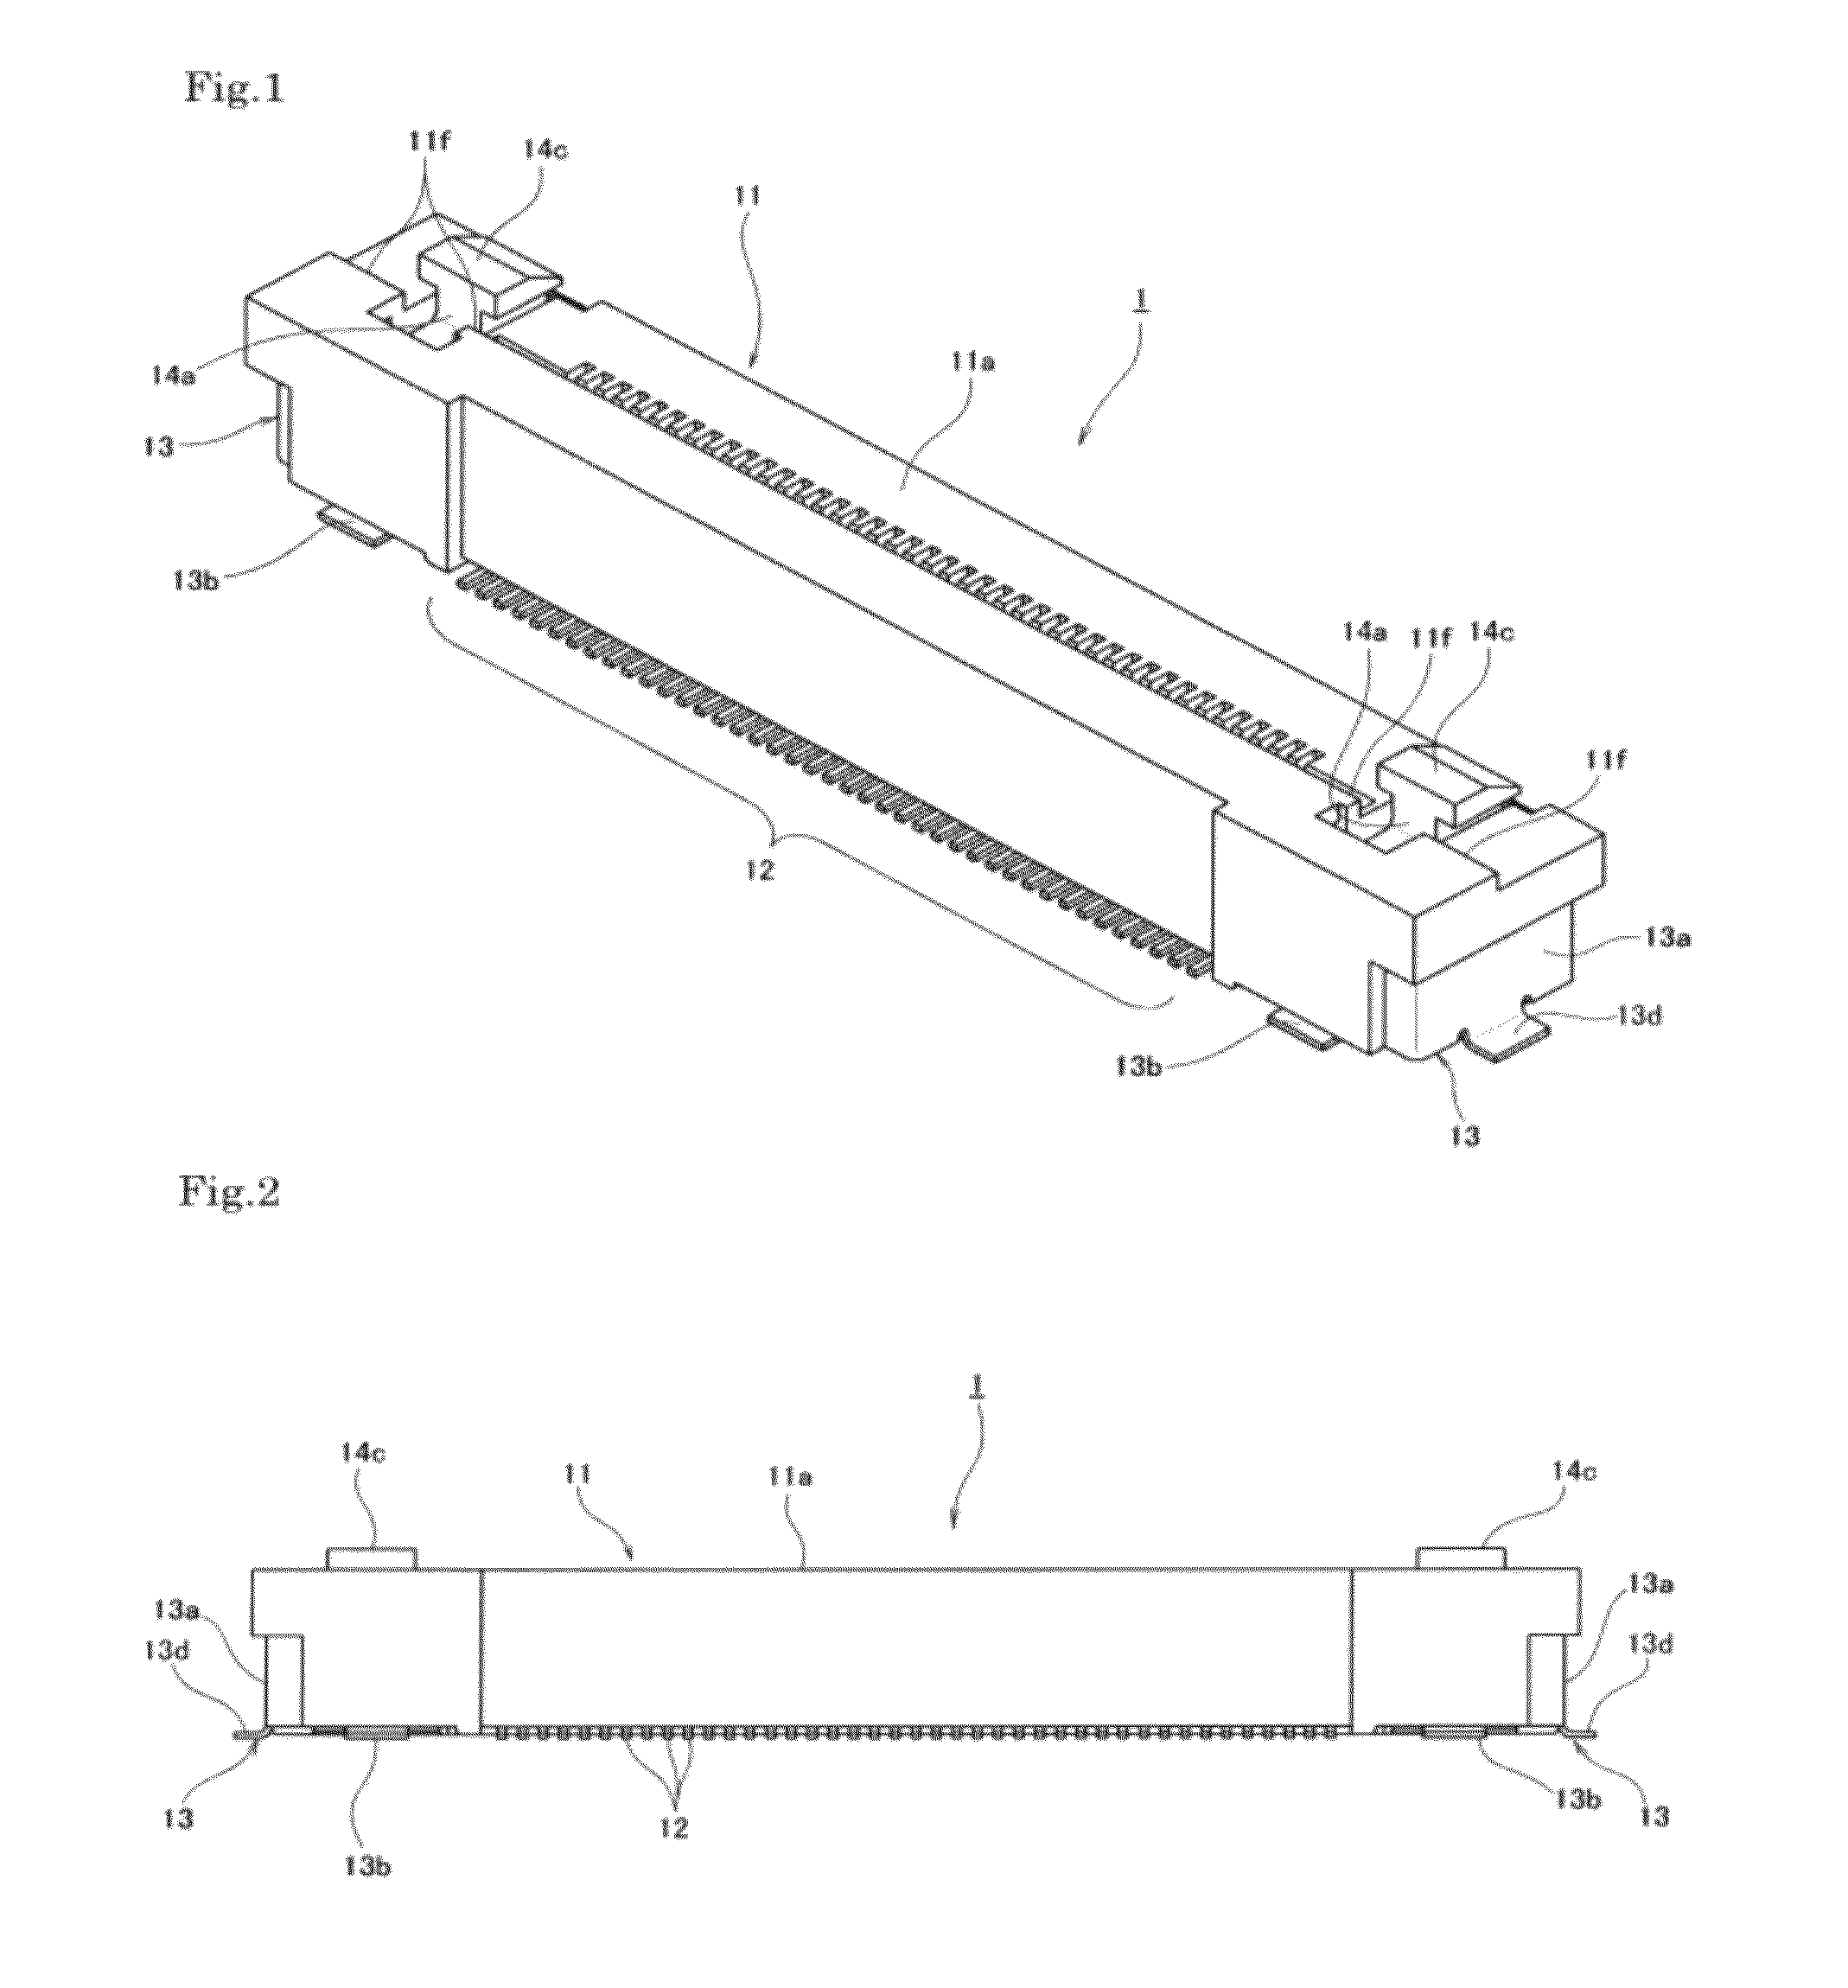 Electrical connector having a board connection leg portion with a locking portion to engage a signal transmission medium and a connector main body with an unlocking portion